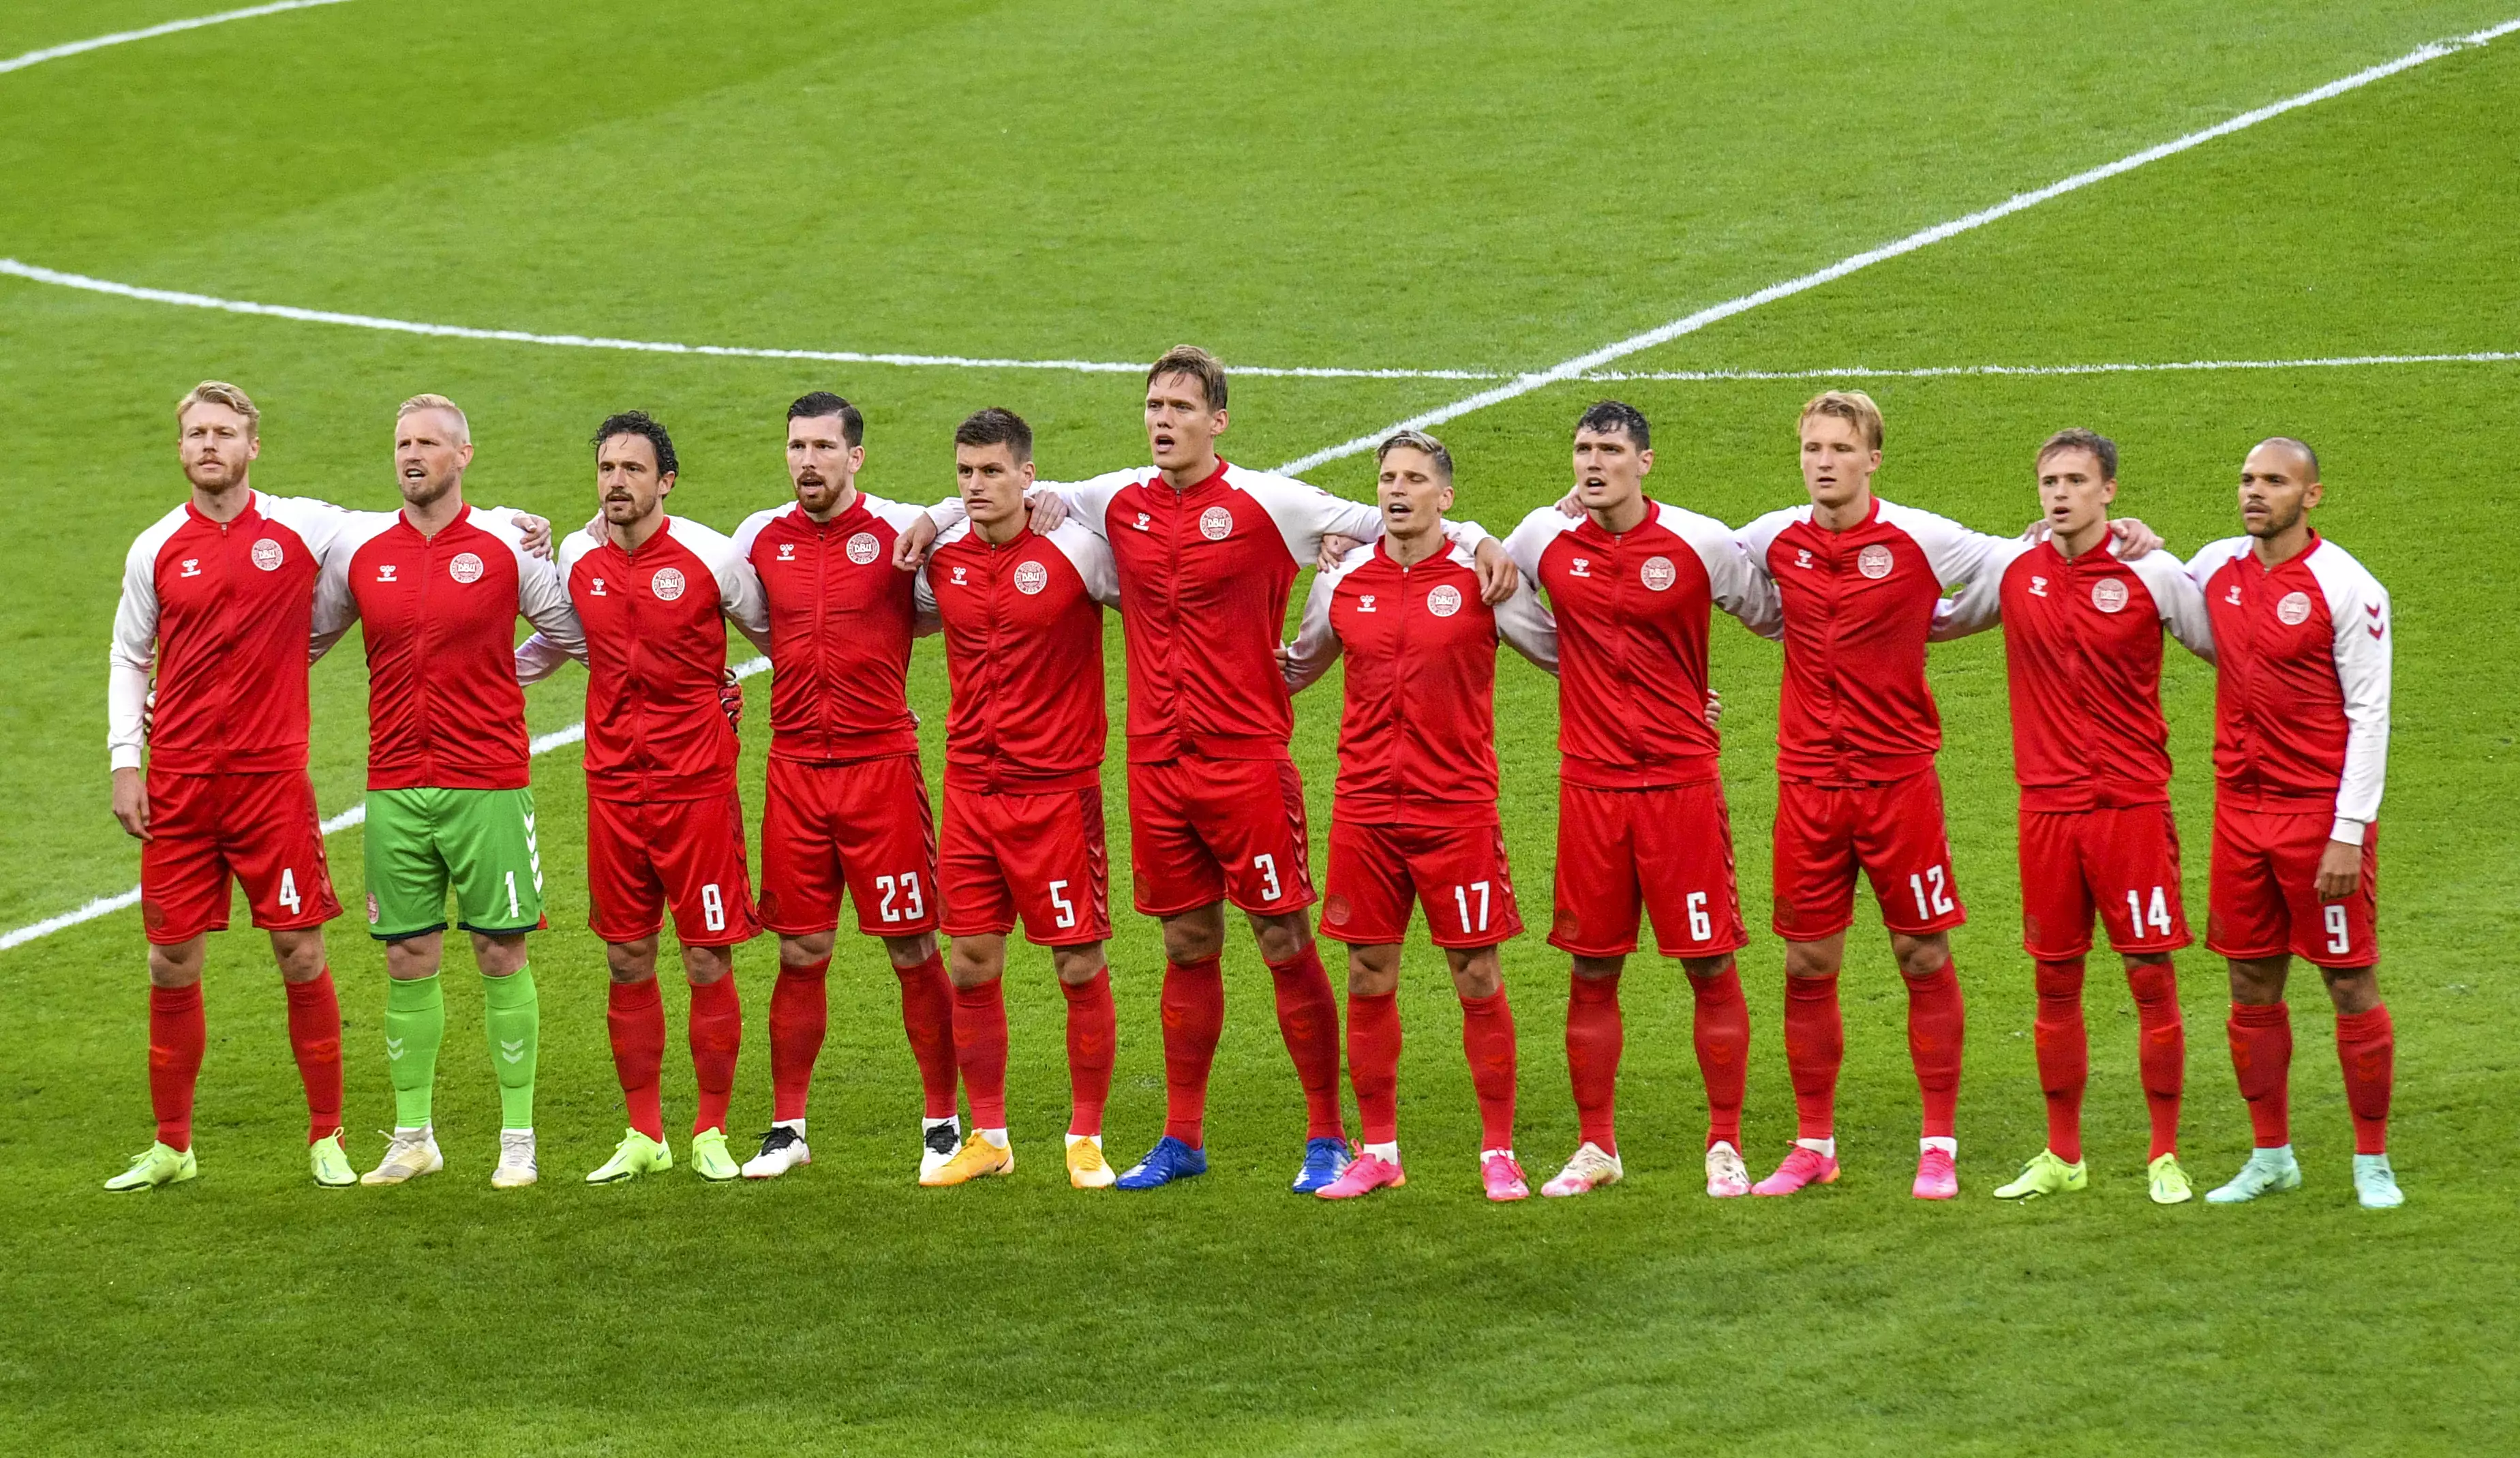 Booing could be heard during Denmark's anthem. Image: PA Images